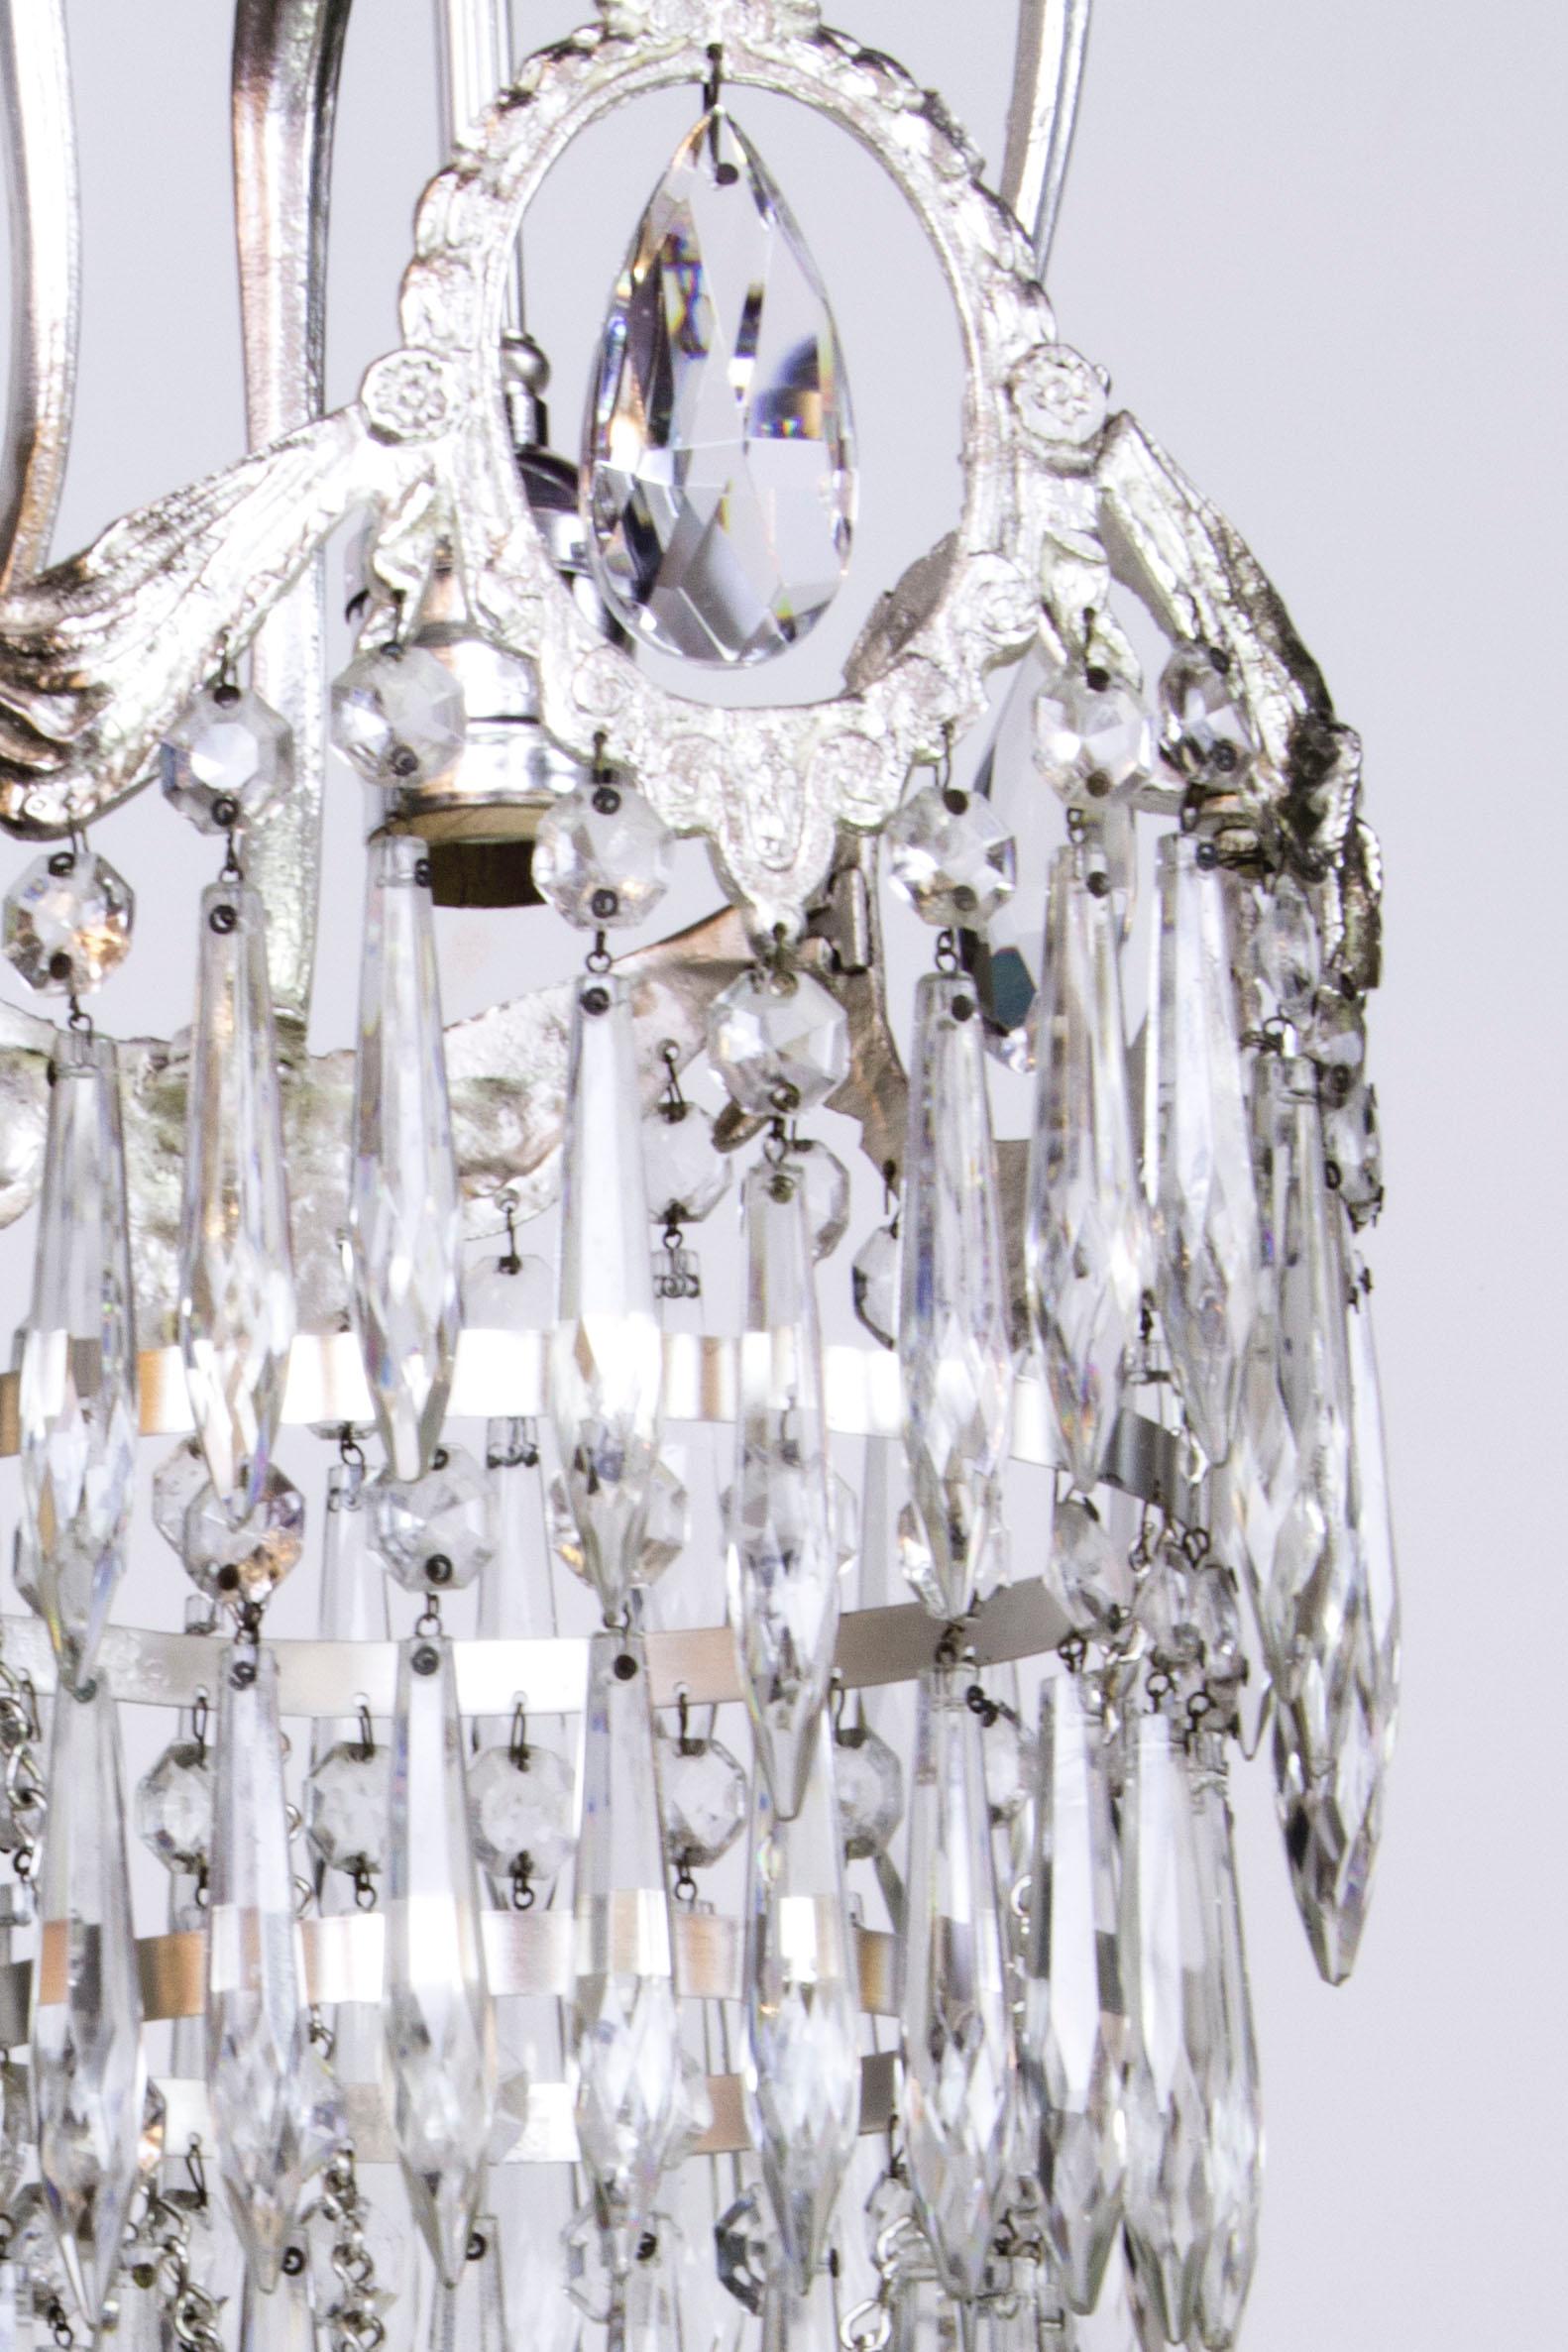 Silver plate fixture with crystal. sculptural crown with keyhole crystal and tiers of crystals cascading below. Add a touch of glamor to a powder room, small hallway, or boudoir. Completely restored and rewired, ready to hang. This pendant has a